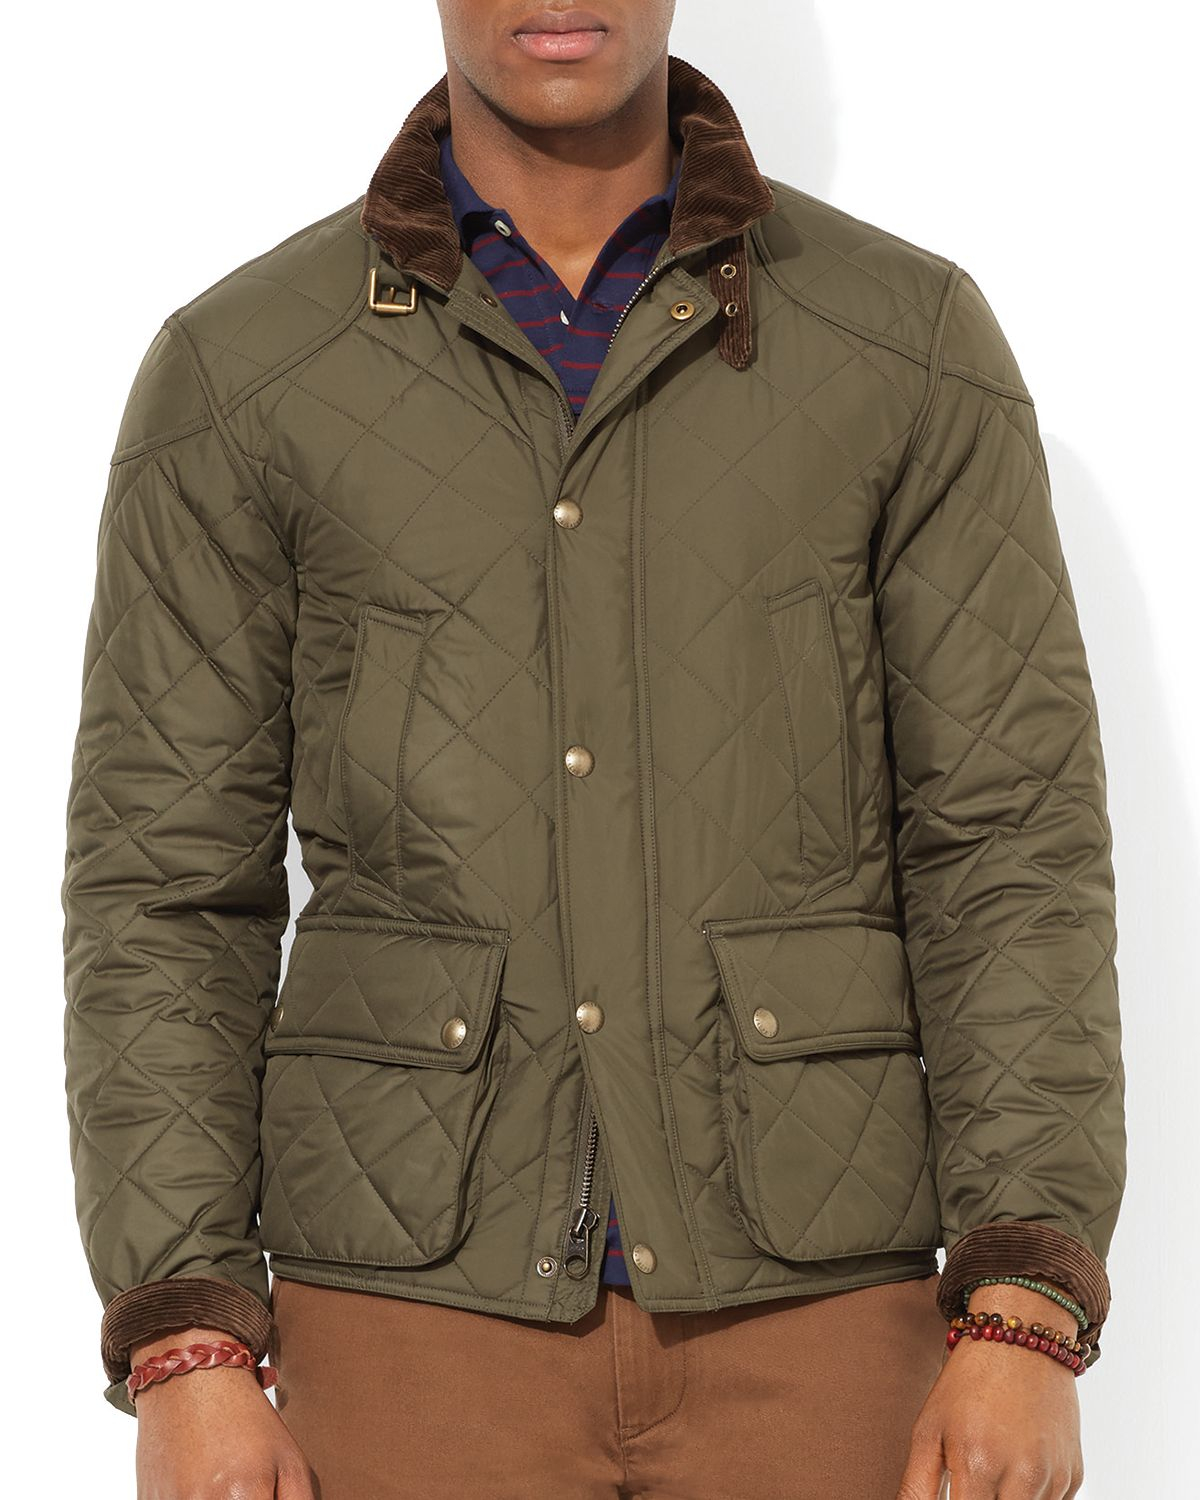 Ralph Lauren Polo Cadwell Quilted Bomber Jacket in Green for Men - Lyst